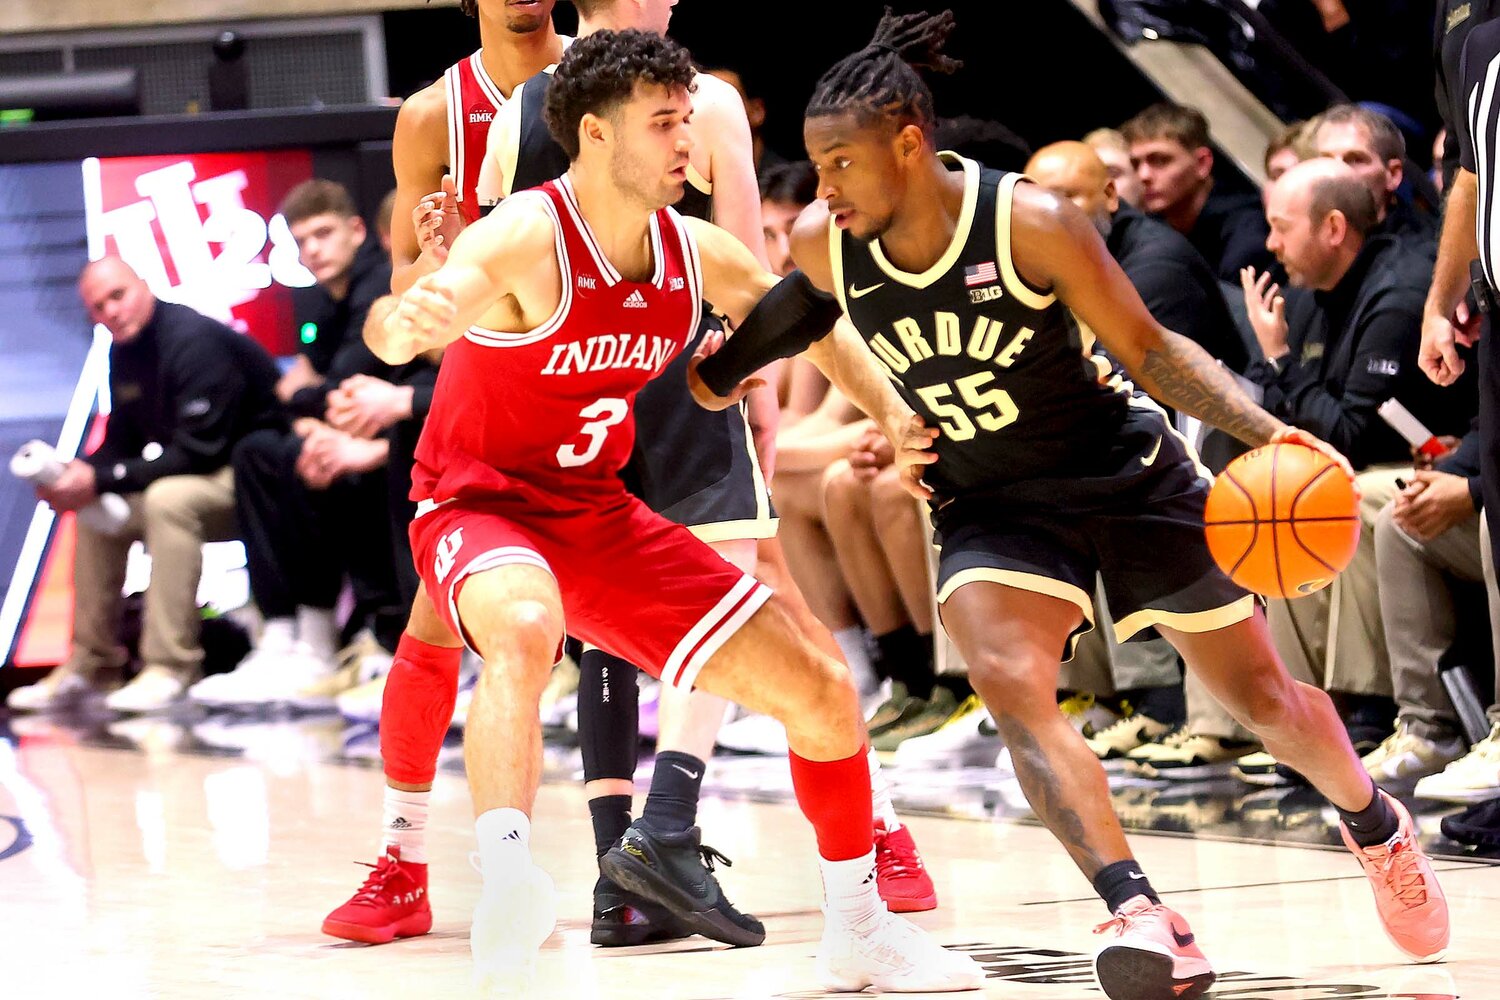 Lance Jones of Purdue - driving around Anthony Leal of Indiana